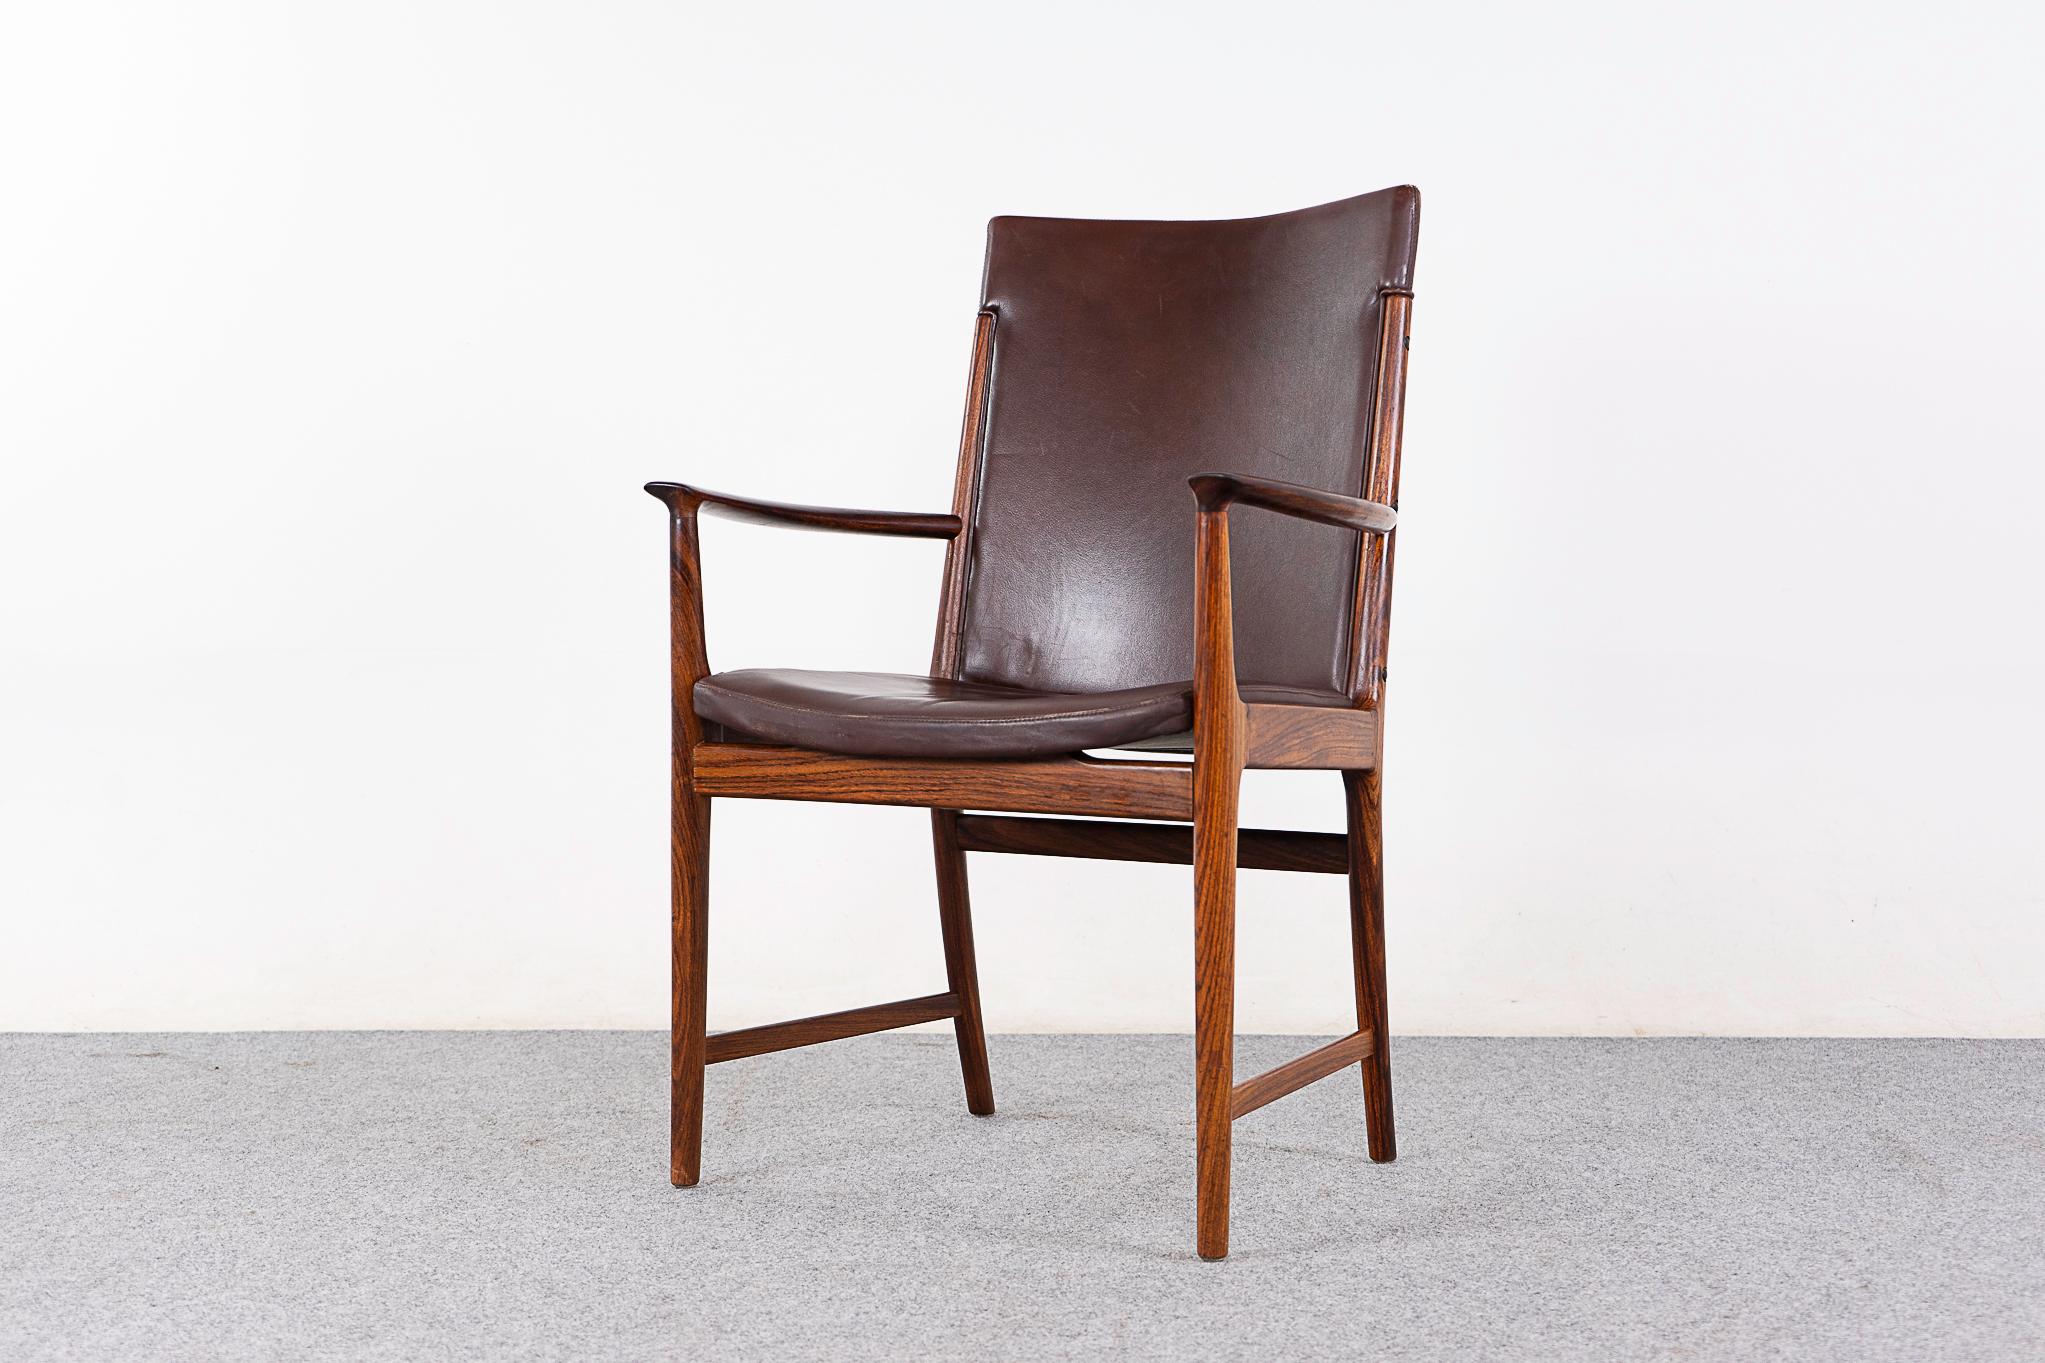 Rosewood & leather Danish arm chair by Kai Lyngfeldt Larsen, circa 1960's. Stunning solid wood frame with upright upholstered back, a very comfortable sit! Elegant, sculptural frame with bowed arms, and many subtle details! 